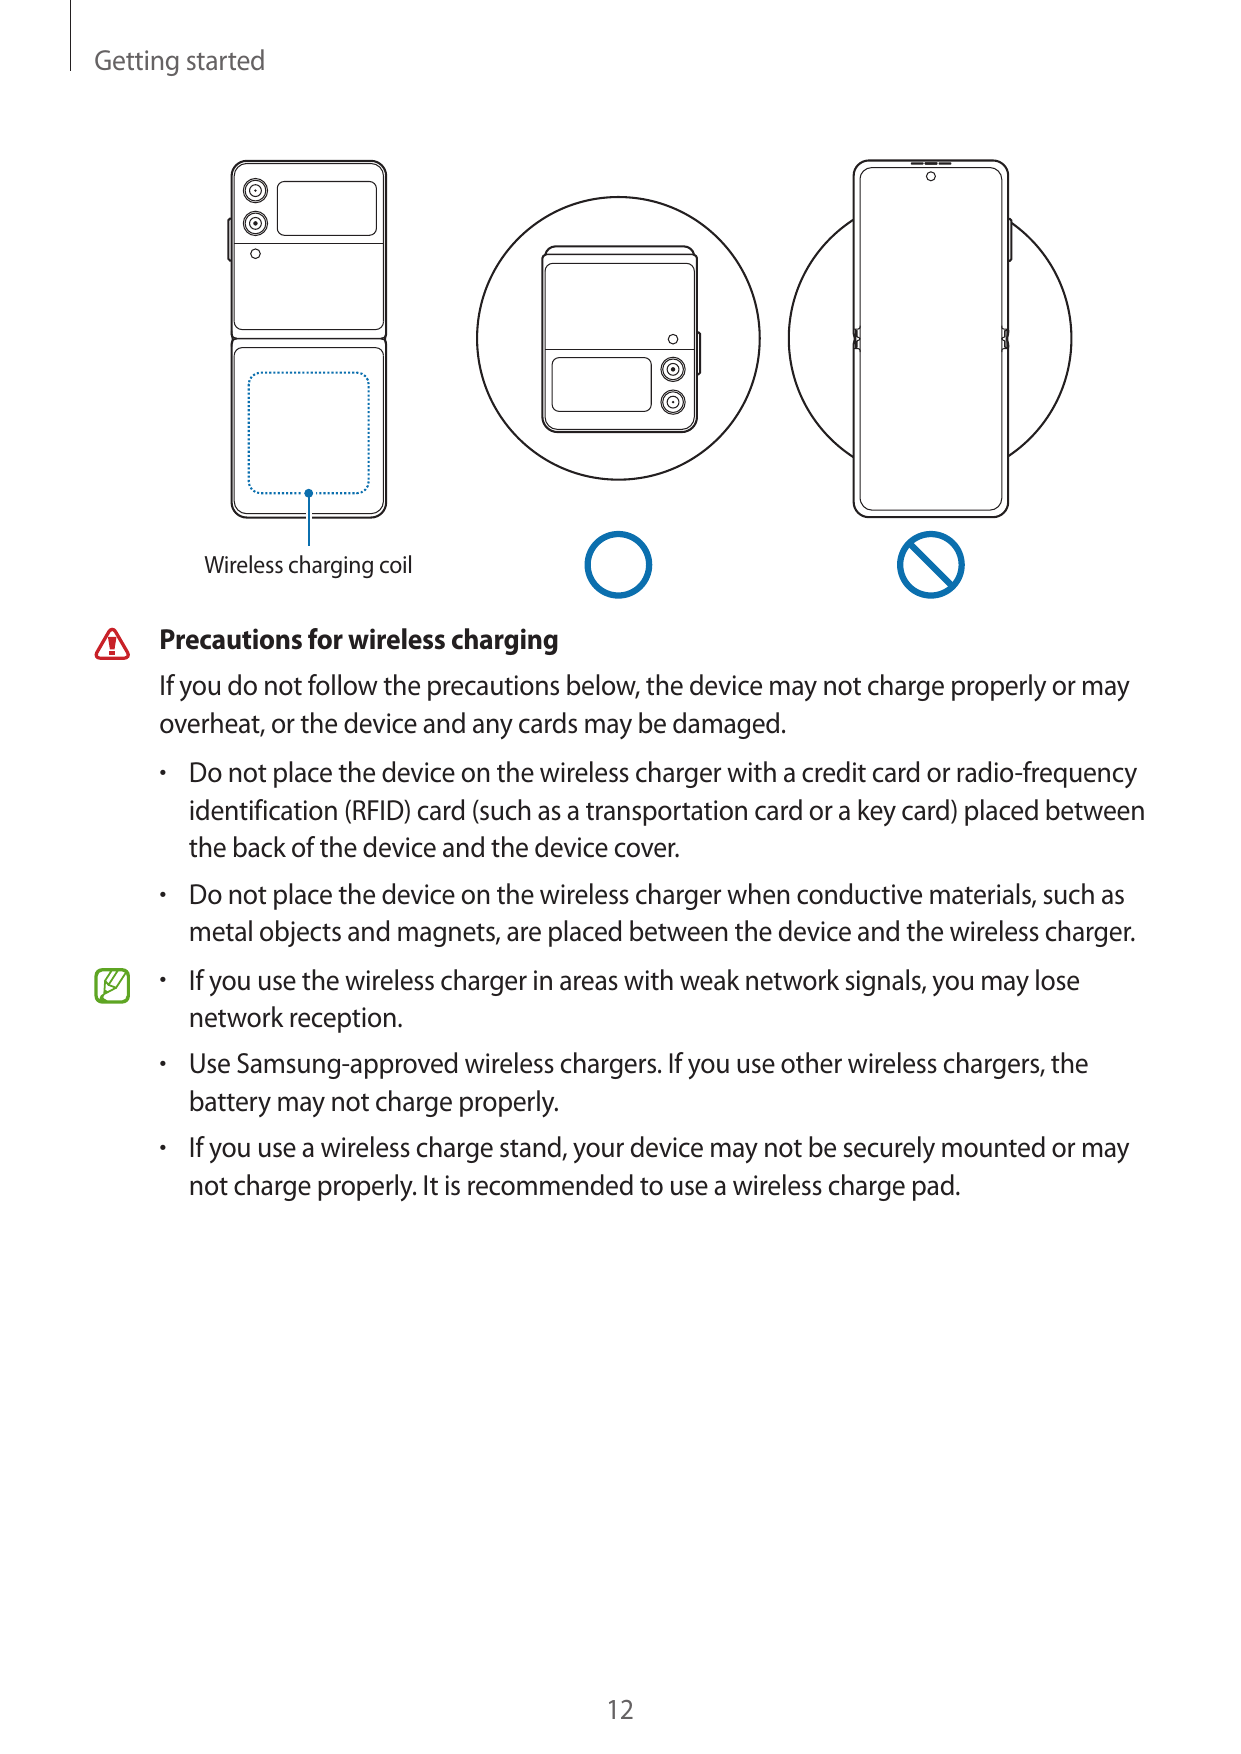 Getting startedWireless charging coilPrecautions for wireless chargingIf you do not follow the precautions below, the device may